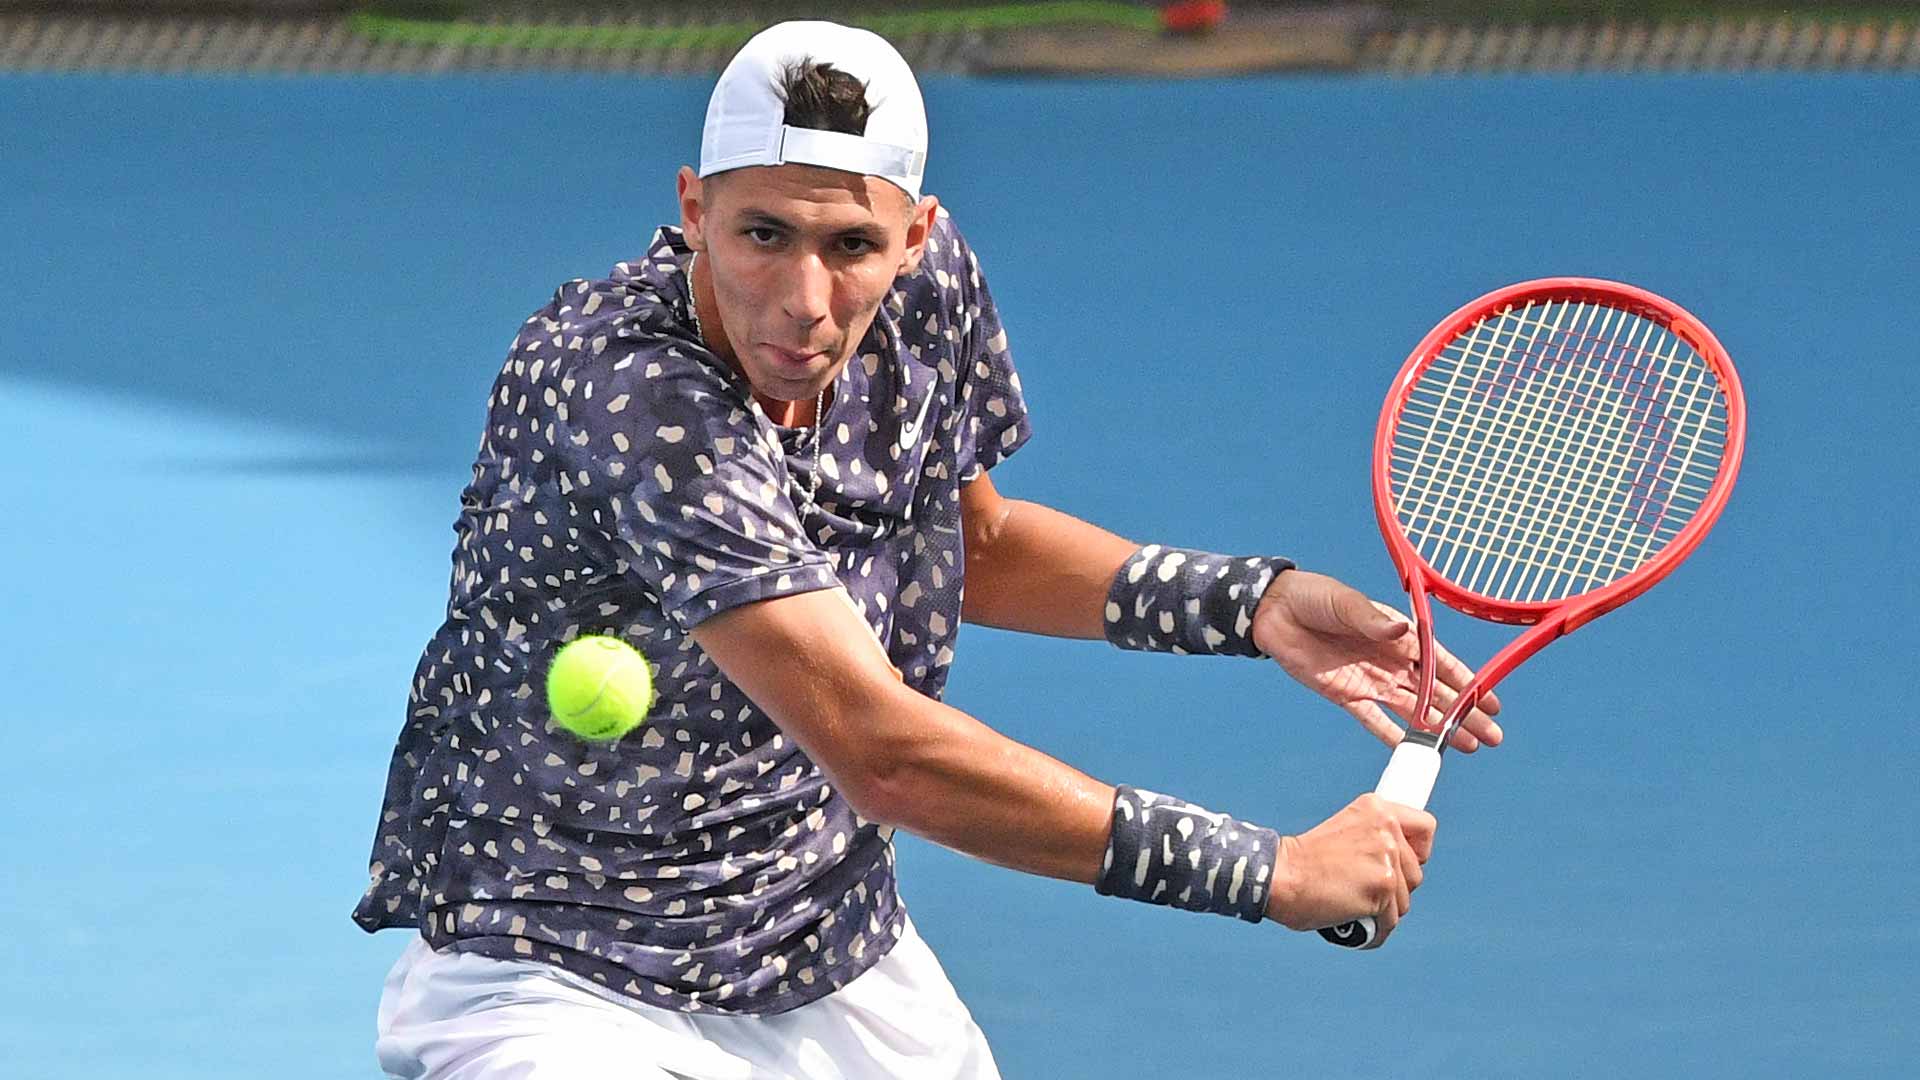 Alexei Popyrin will play Daniil Medvedev at the Australian Open with the hopes of reaching the fourth round of a major for the first time.